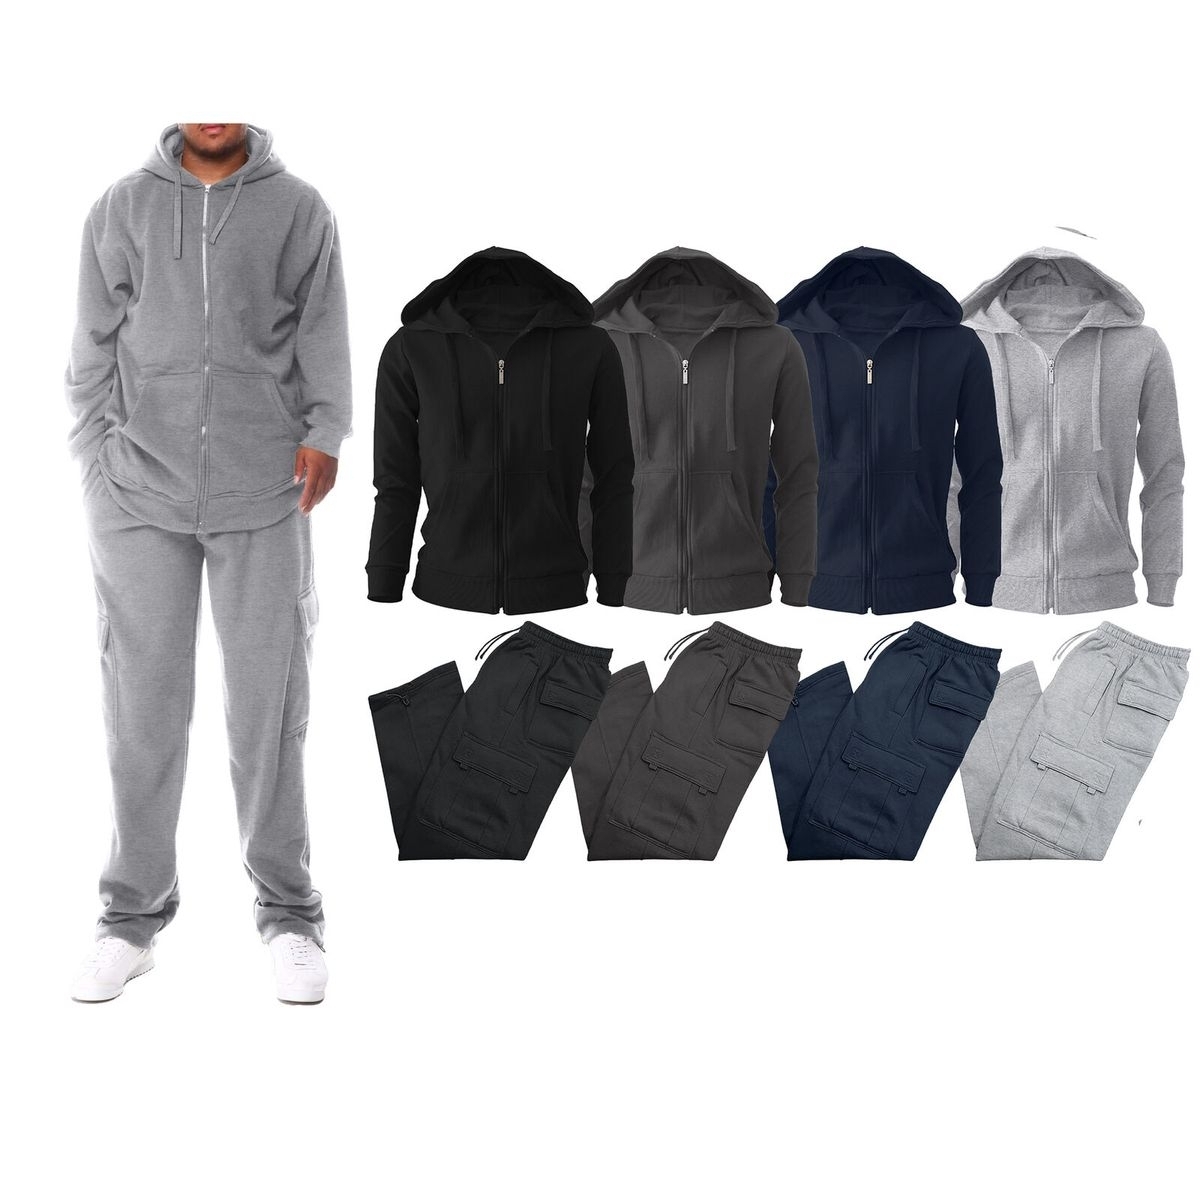 Multi-Pack: Men's Big & Tall Winter Warm Athletic Active Cozy Fleece Lined Multi-Pocket Full Zip Up Cargo Tracksuit - Navy, 1-pack, 3xl